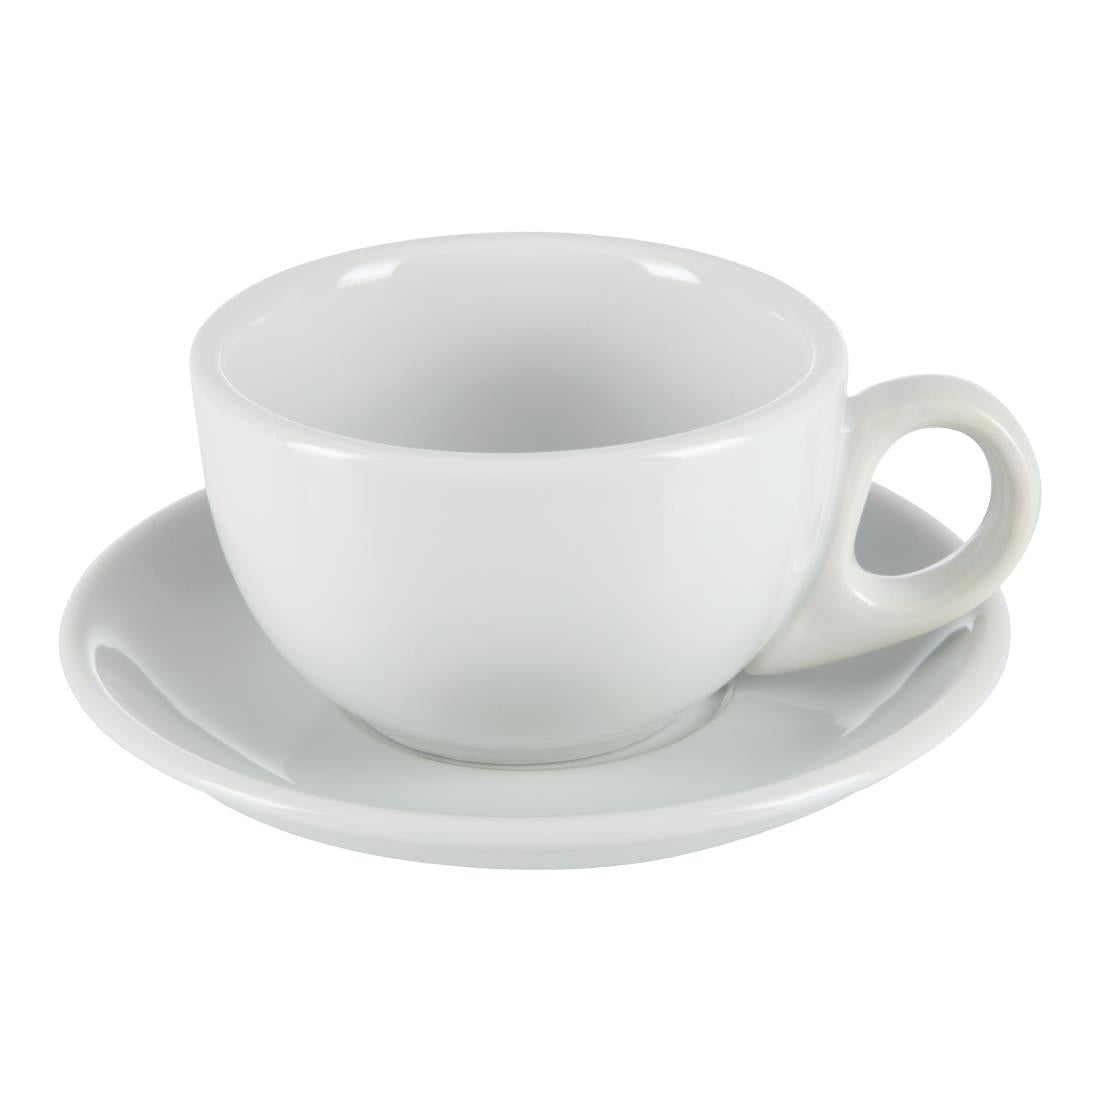 Athena Hotelware Cappuccino Cups 8oz (Pack of 24) JD Catering Equipment Solutions Ltd